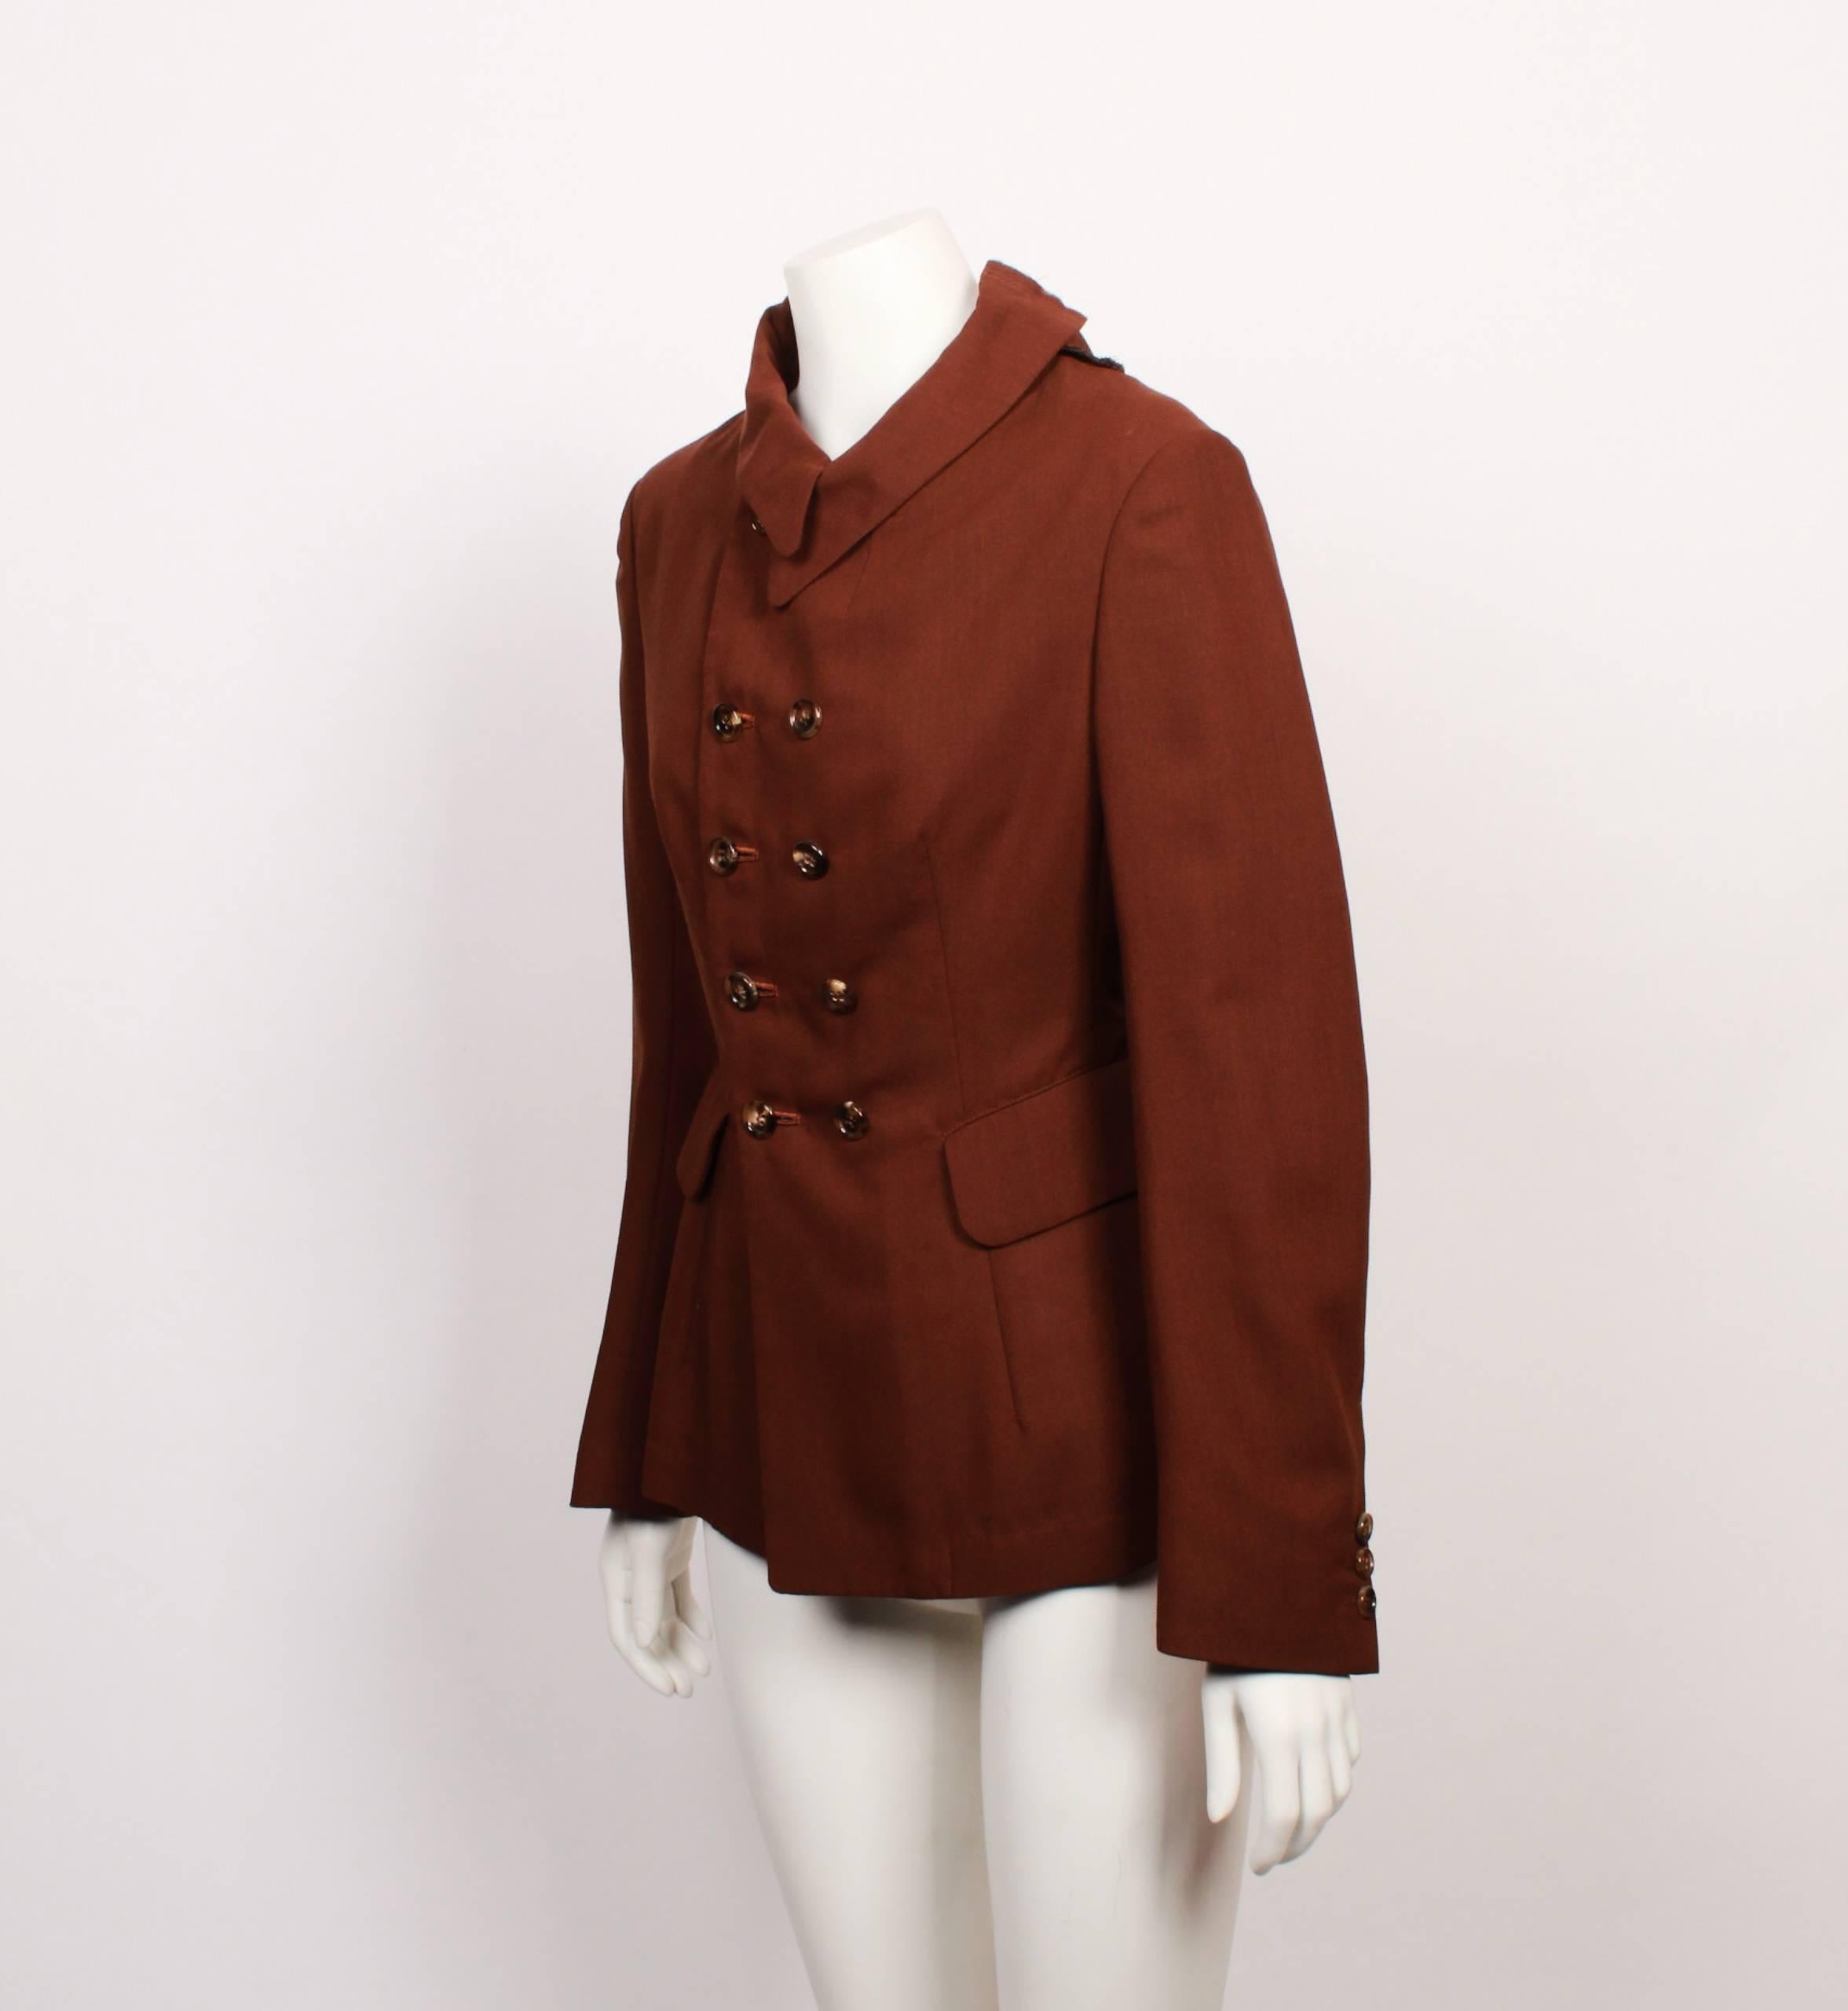 Chocolate Brown Double Sided Jacket.
Button detailing down front side & back side. 
Deconstructed shoulder detail. 